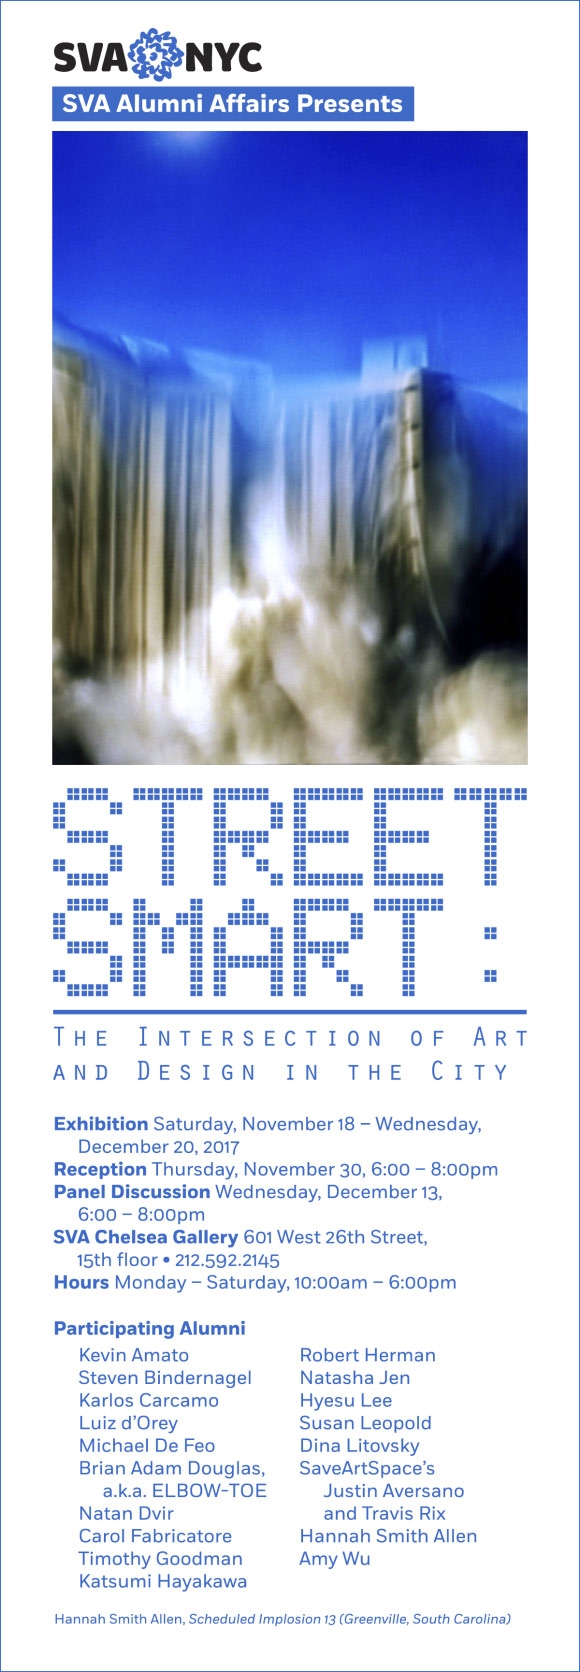 Poster for the event Street smart